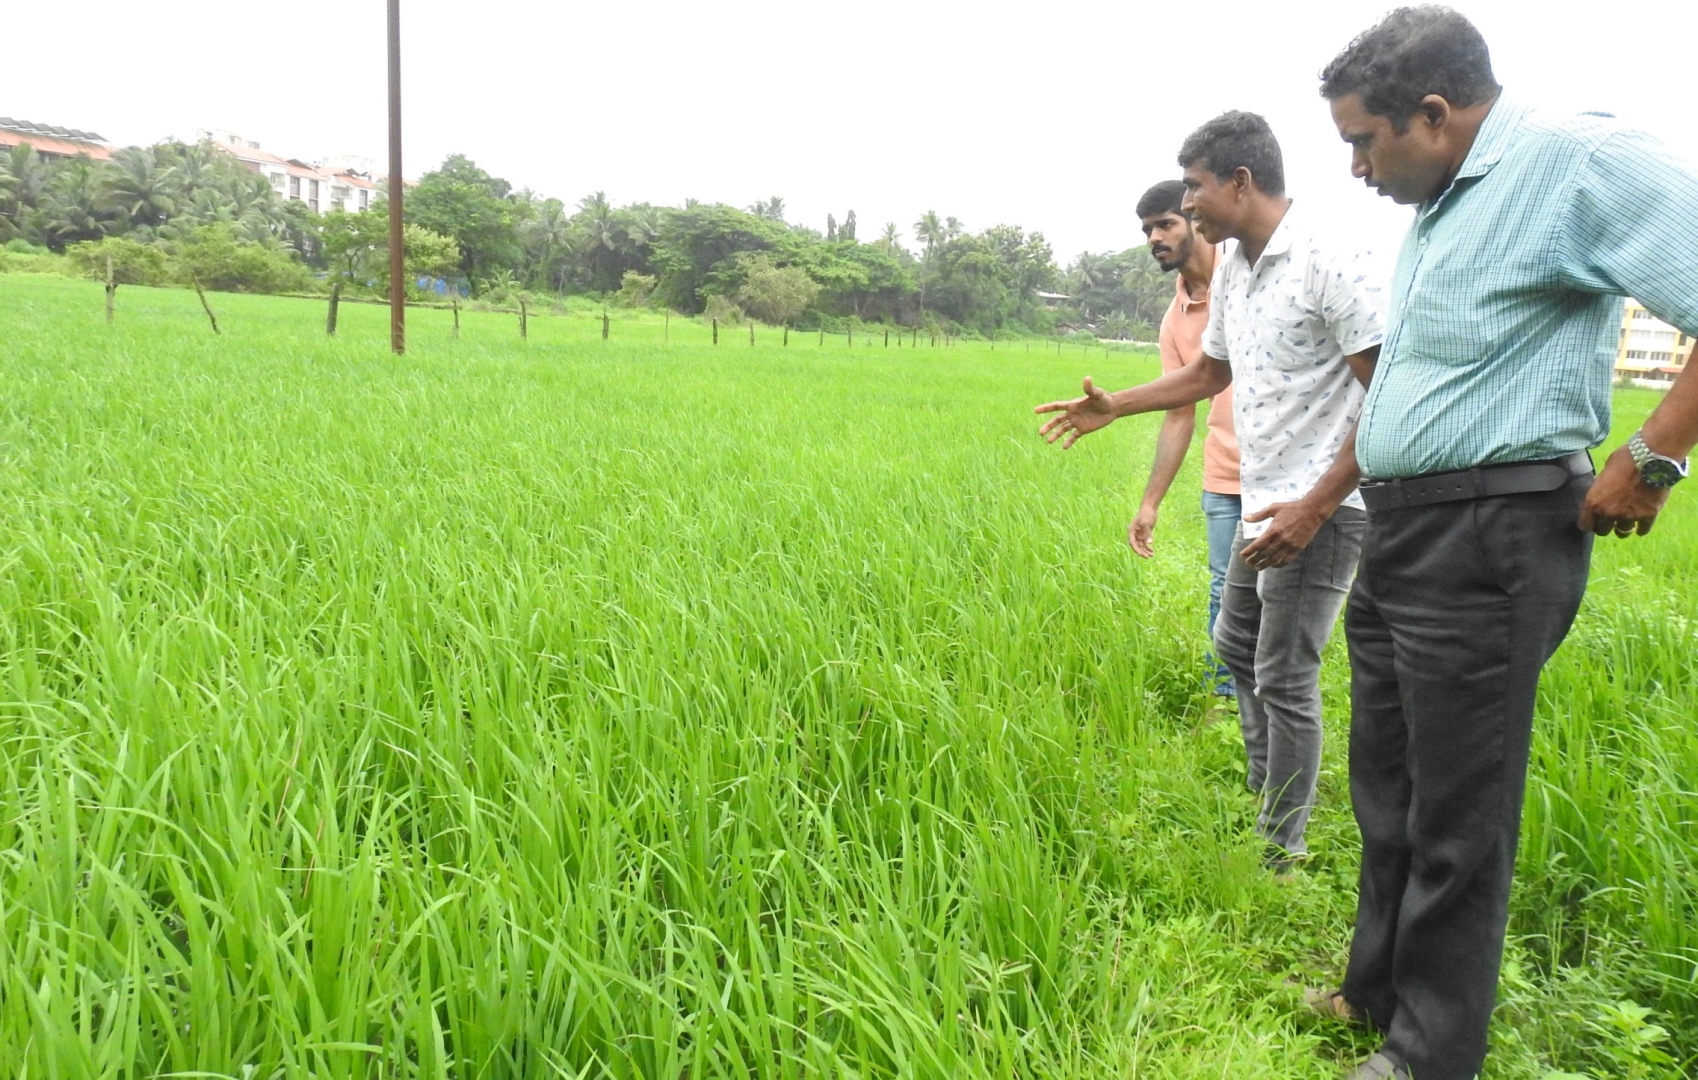 Sought for devpt projects, Aquem-Baixo farmers retain and cultivate paddy fields